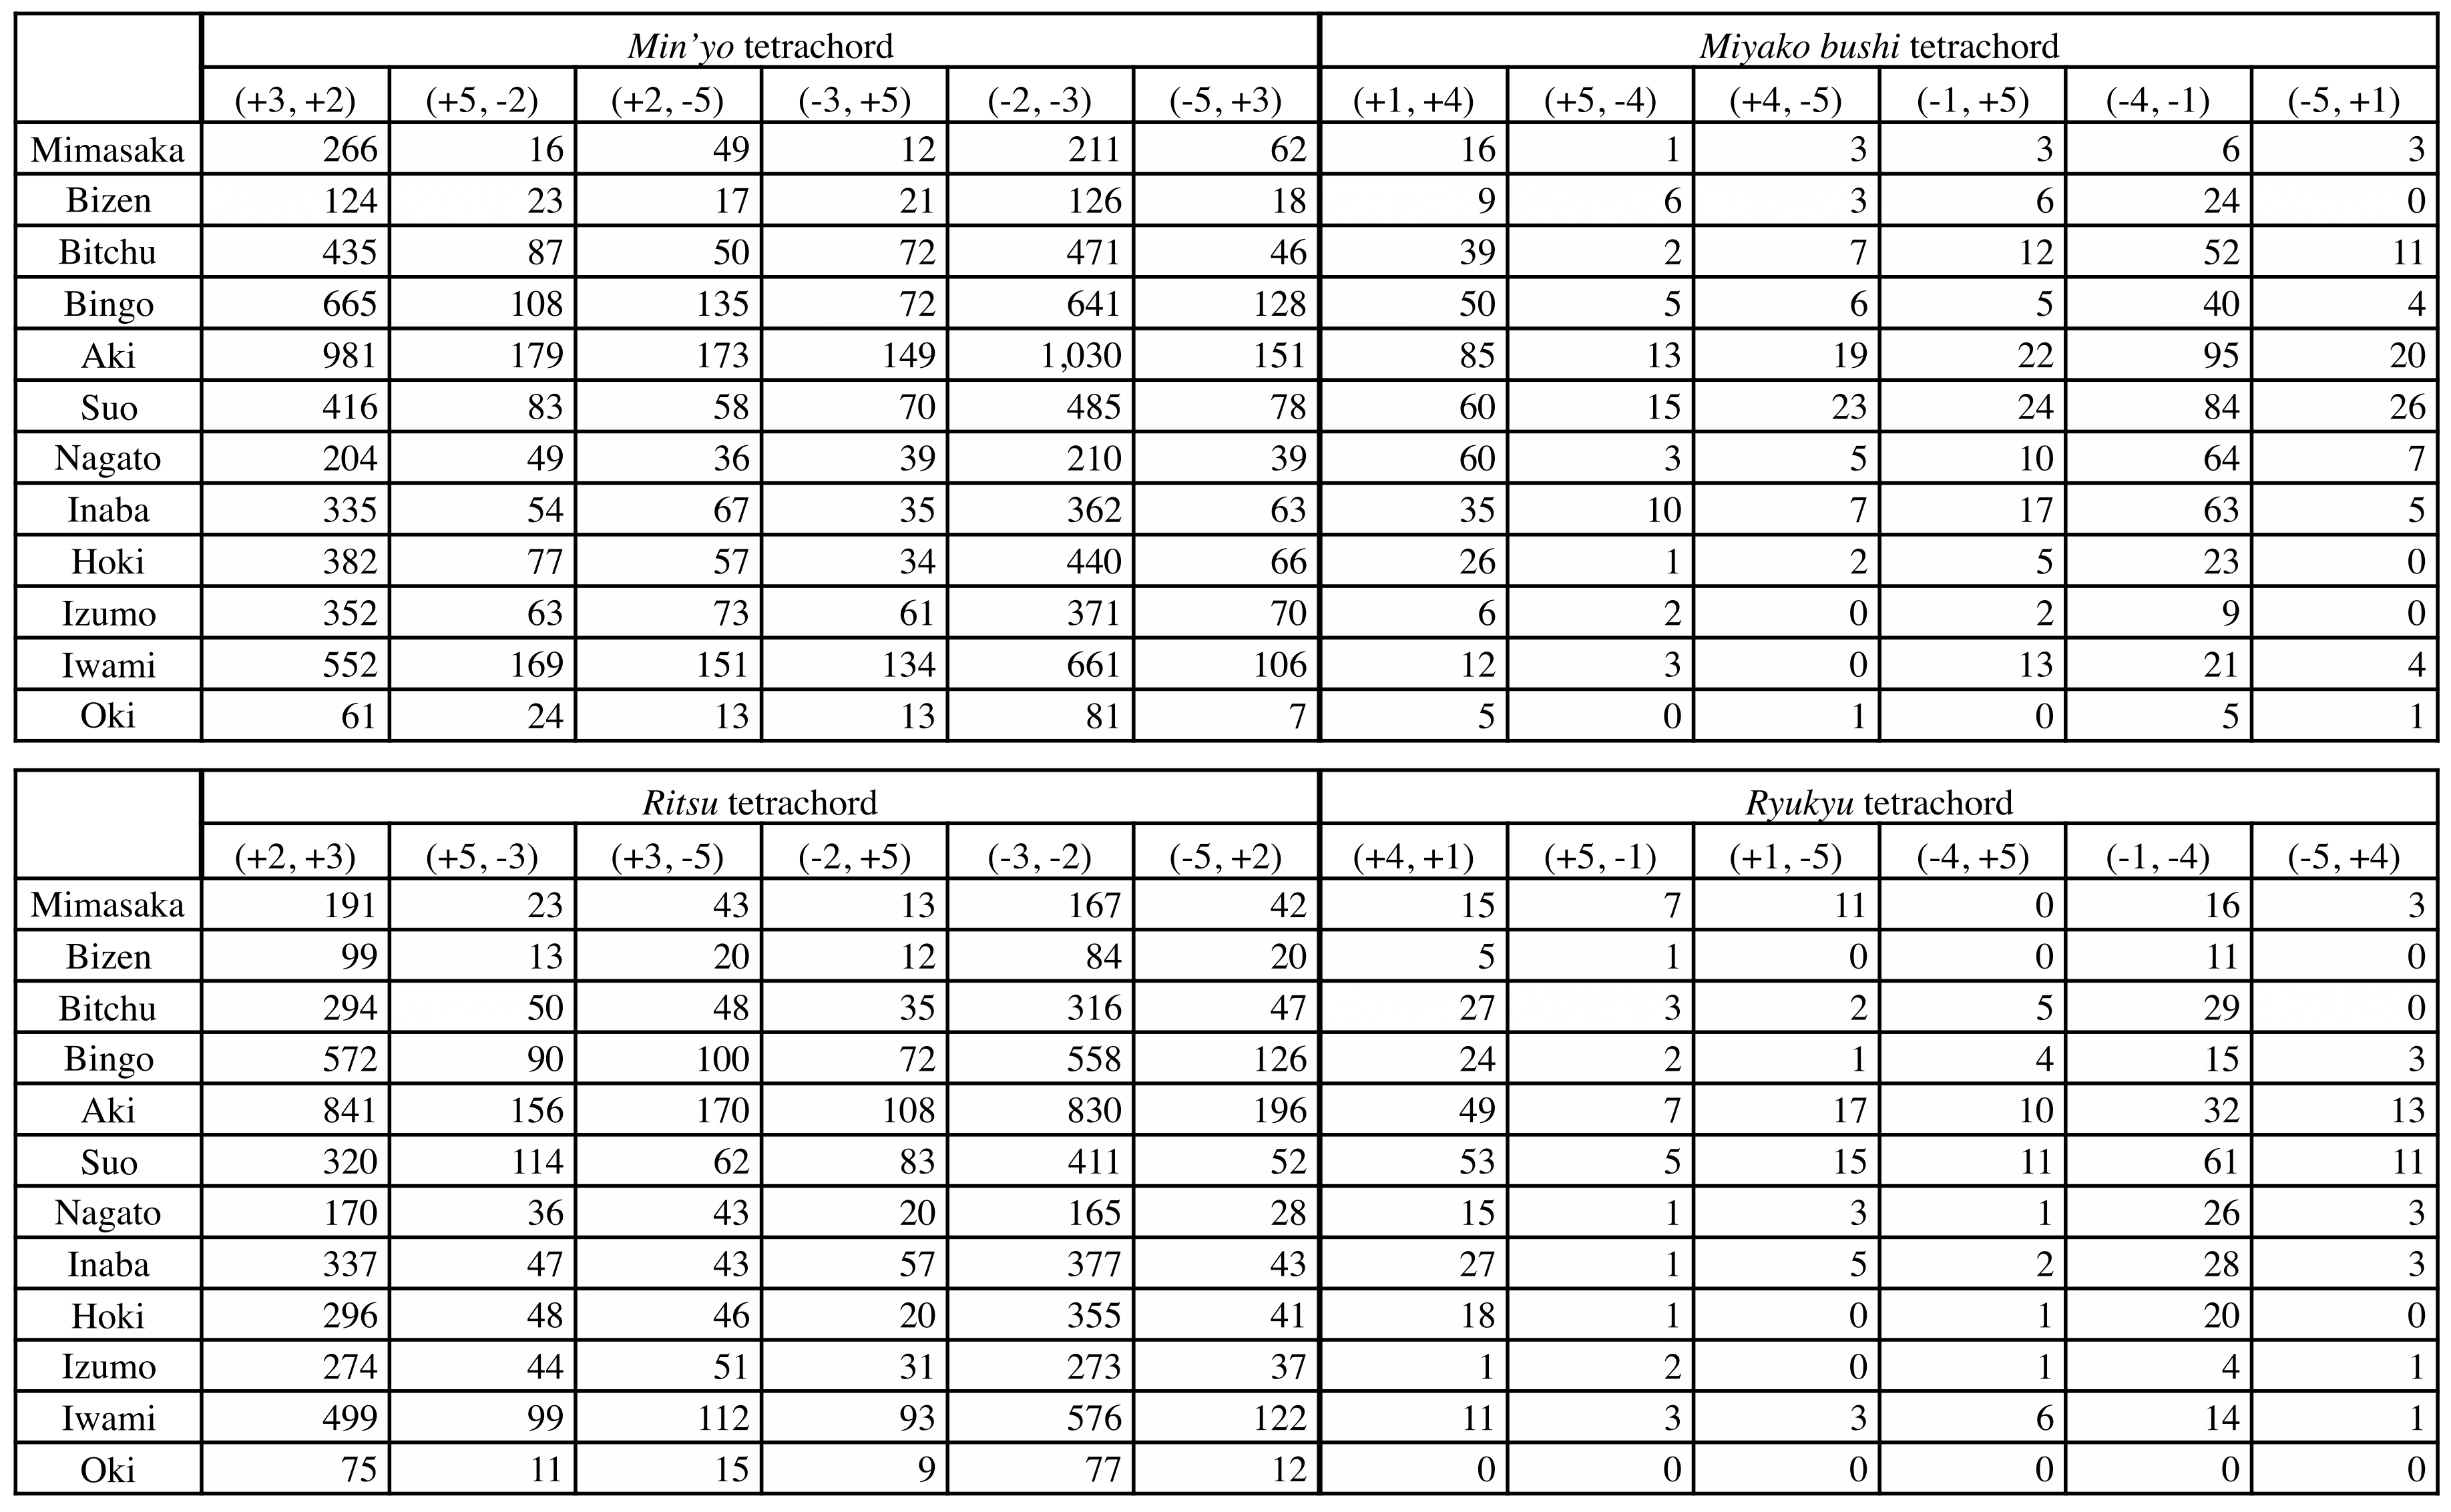 Table 5: Number of Transition Patterns for the Four Tetrachords